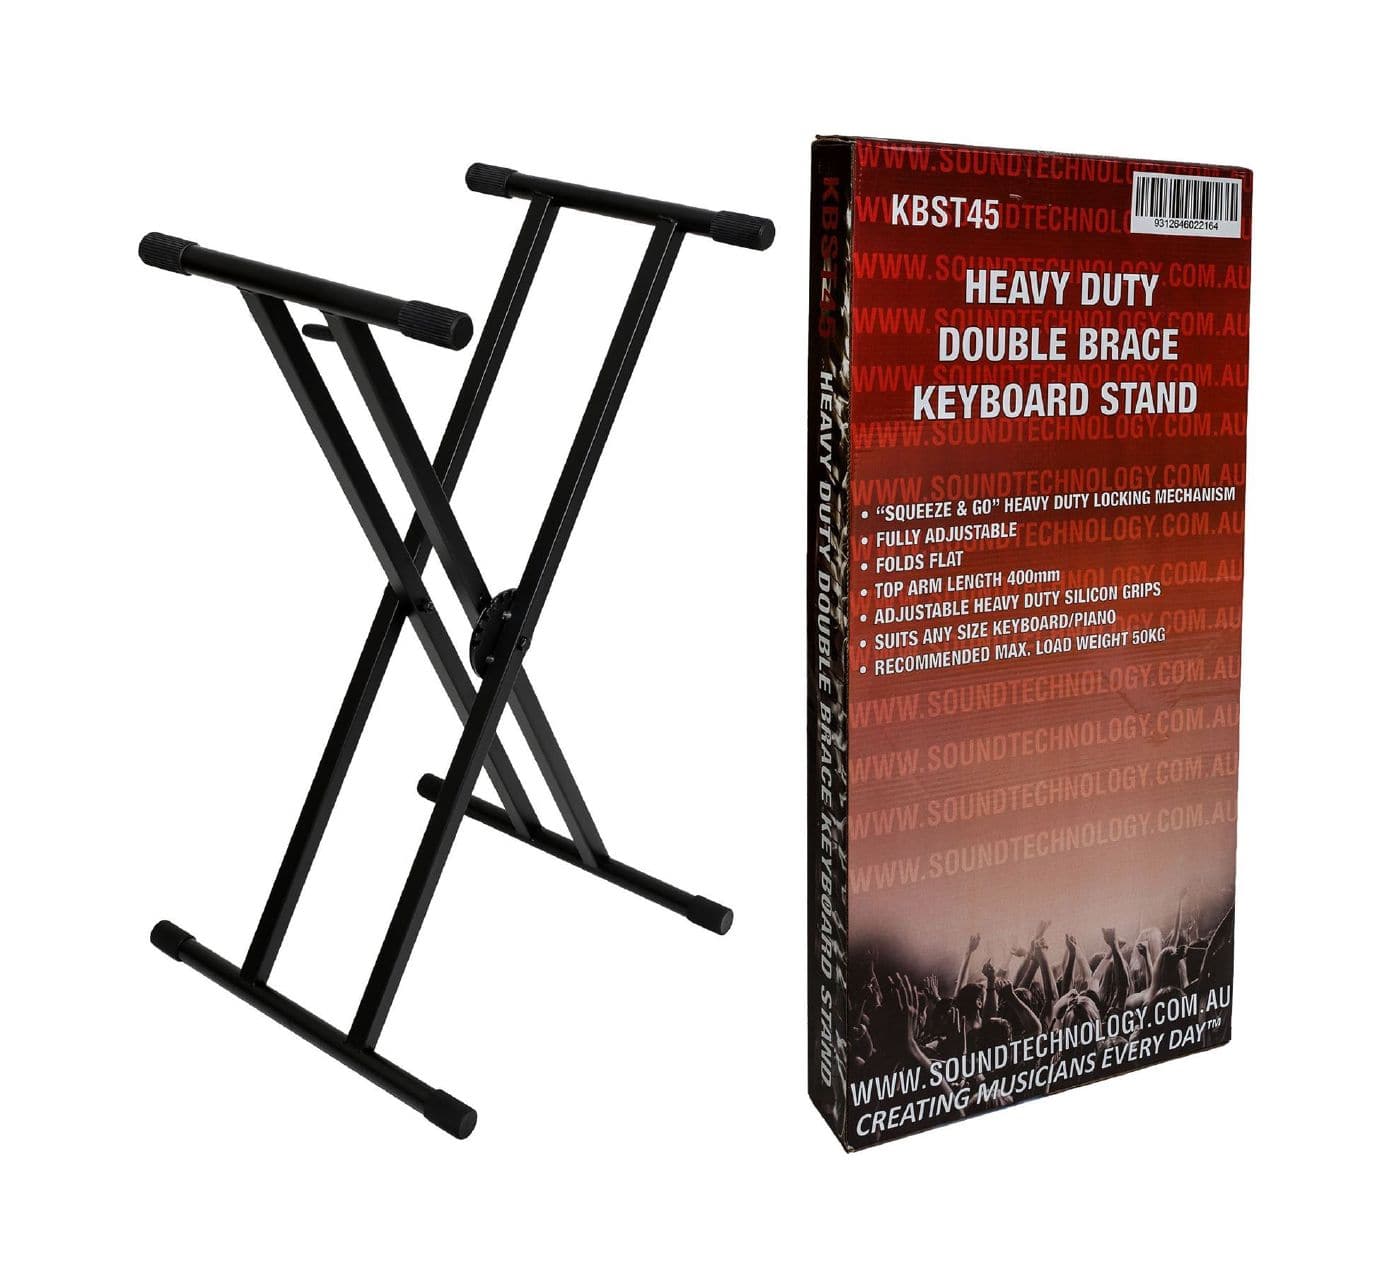 Casio KBST45 Double Braced Keyboard Stand - Joondalup Music Centre